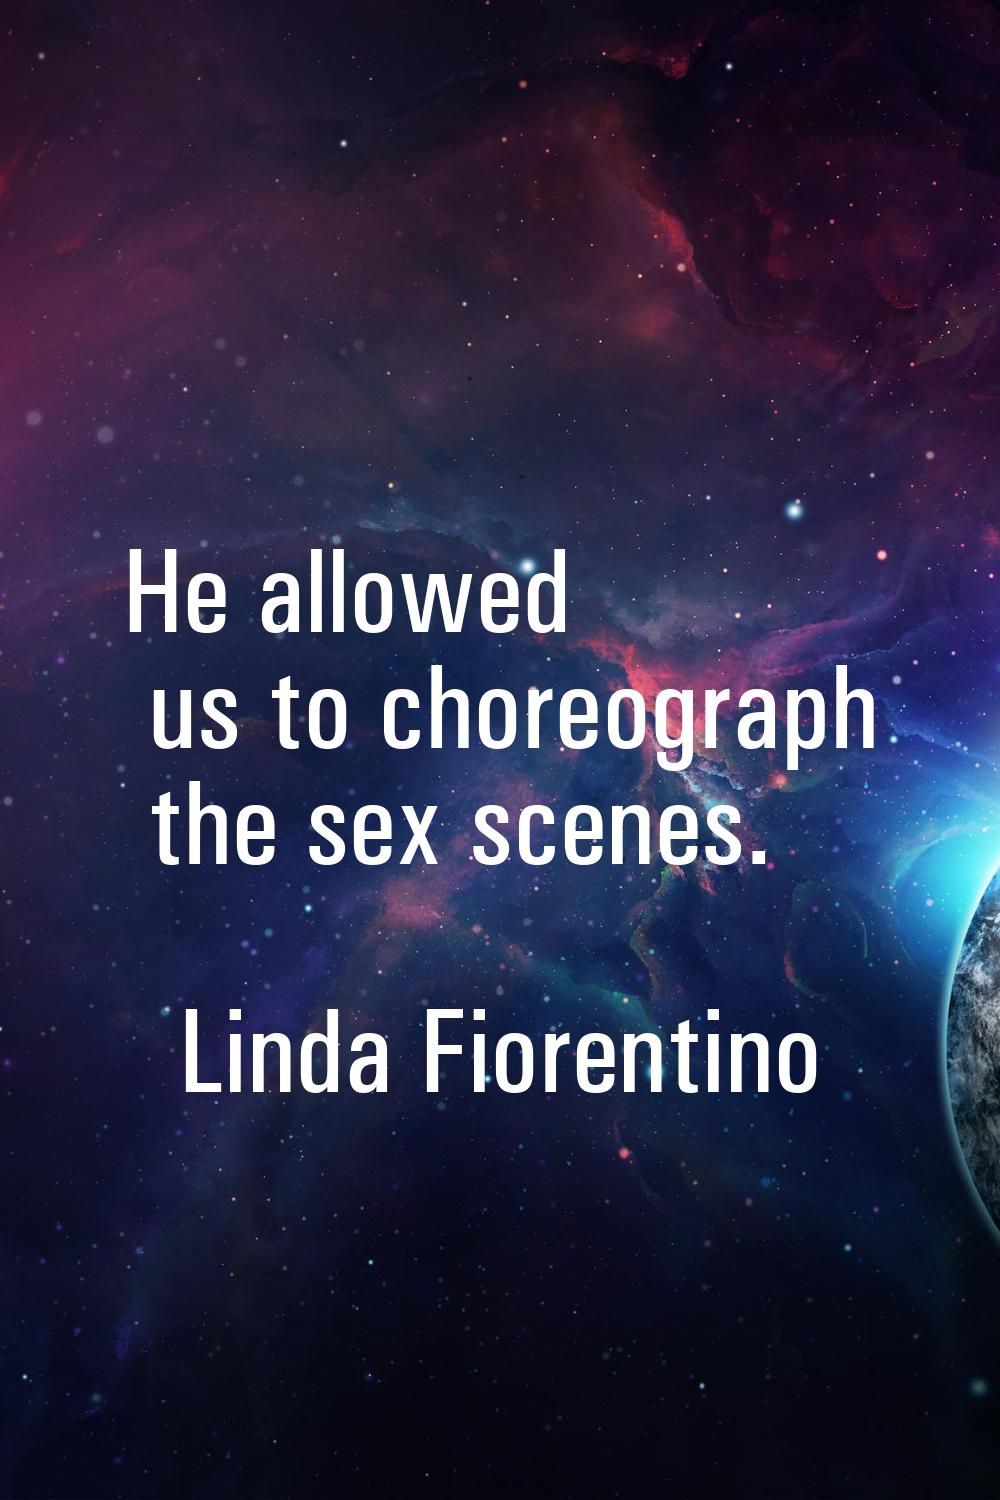 He allowed us to choreograph the sex scenes.